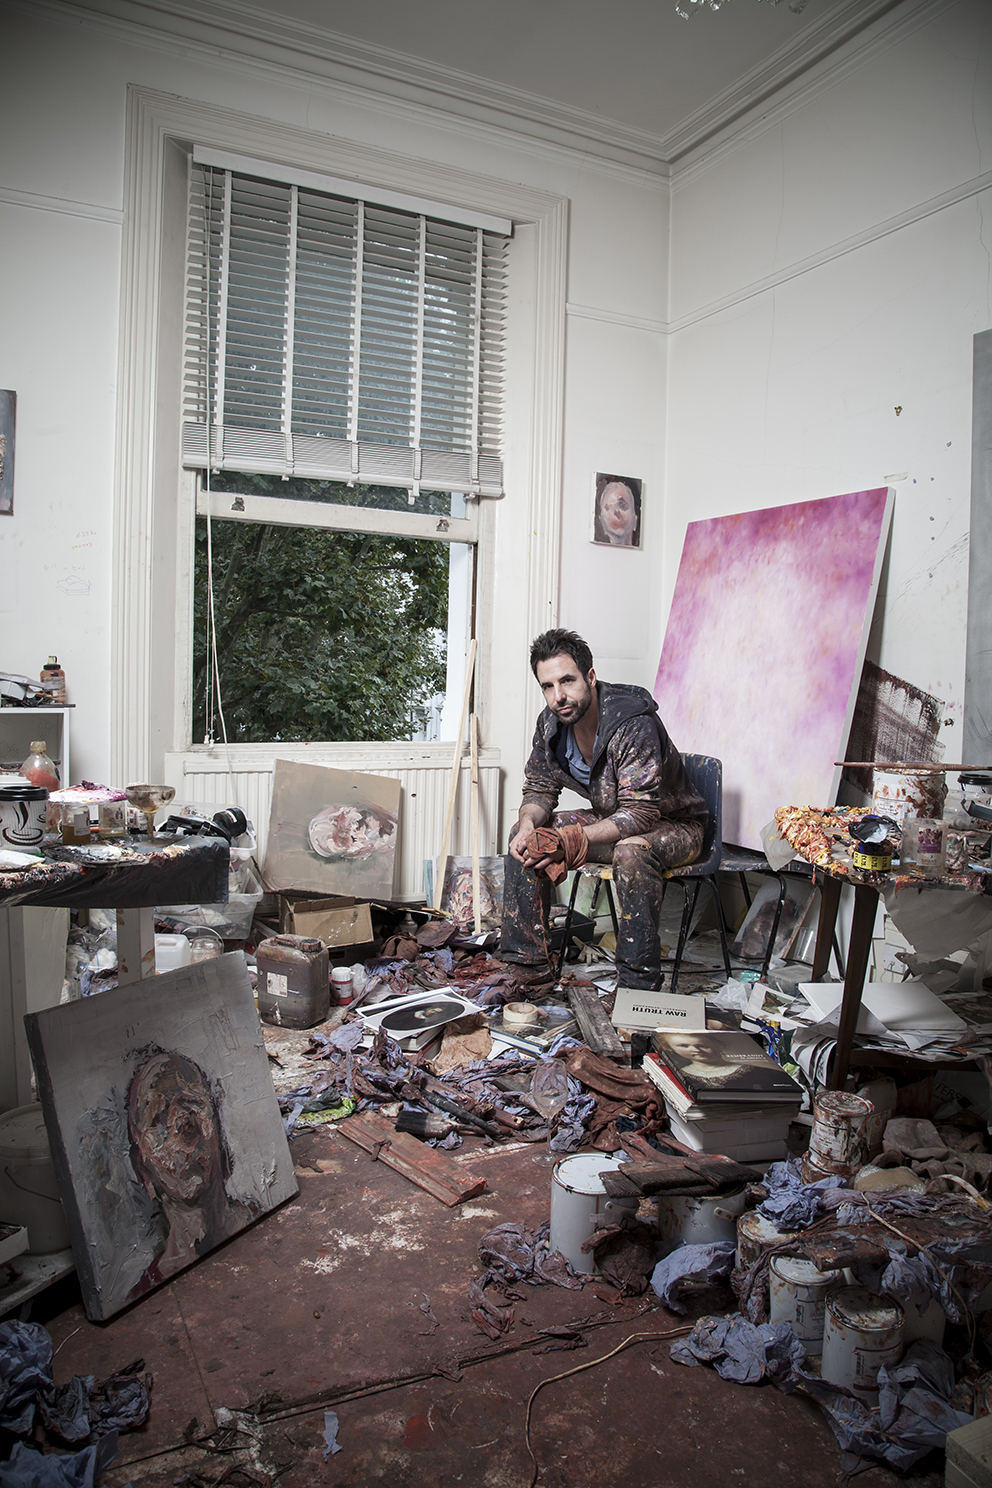 English contemporary artist and painter Antony Micallef photographs taken at his London Studio.